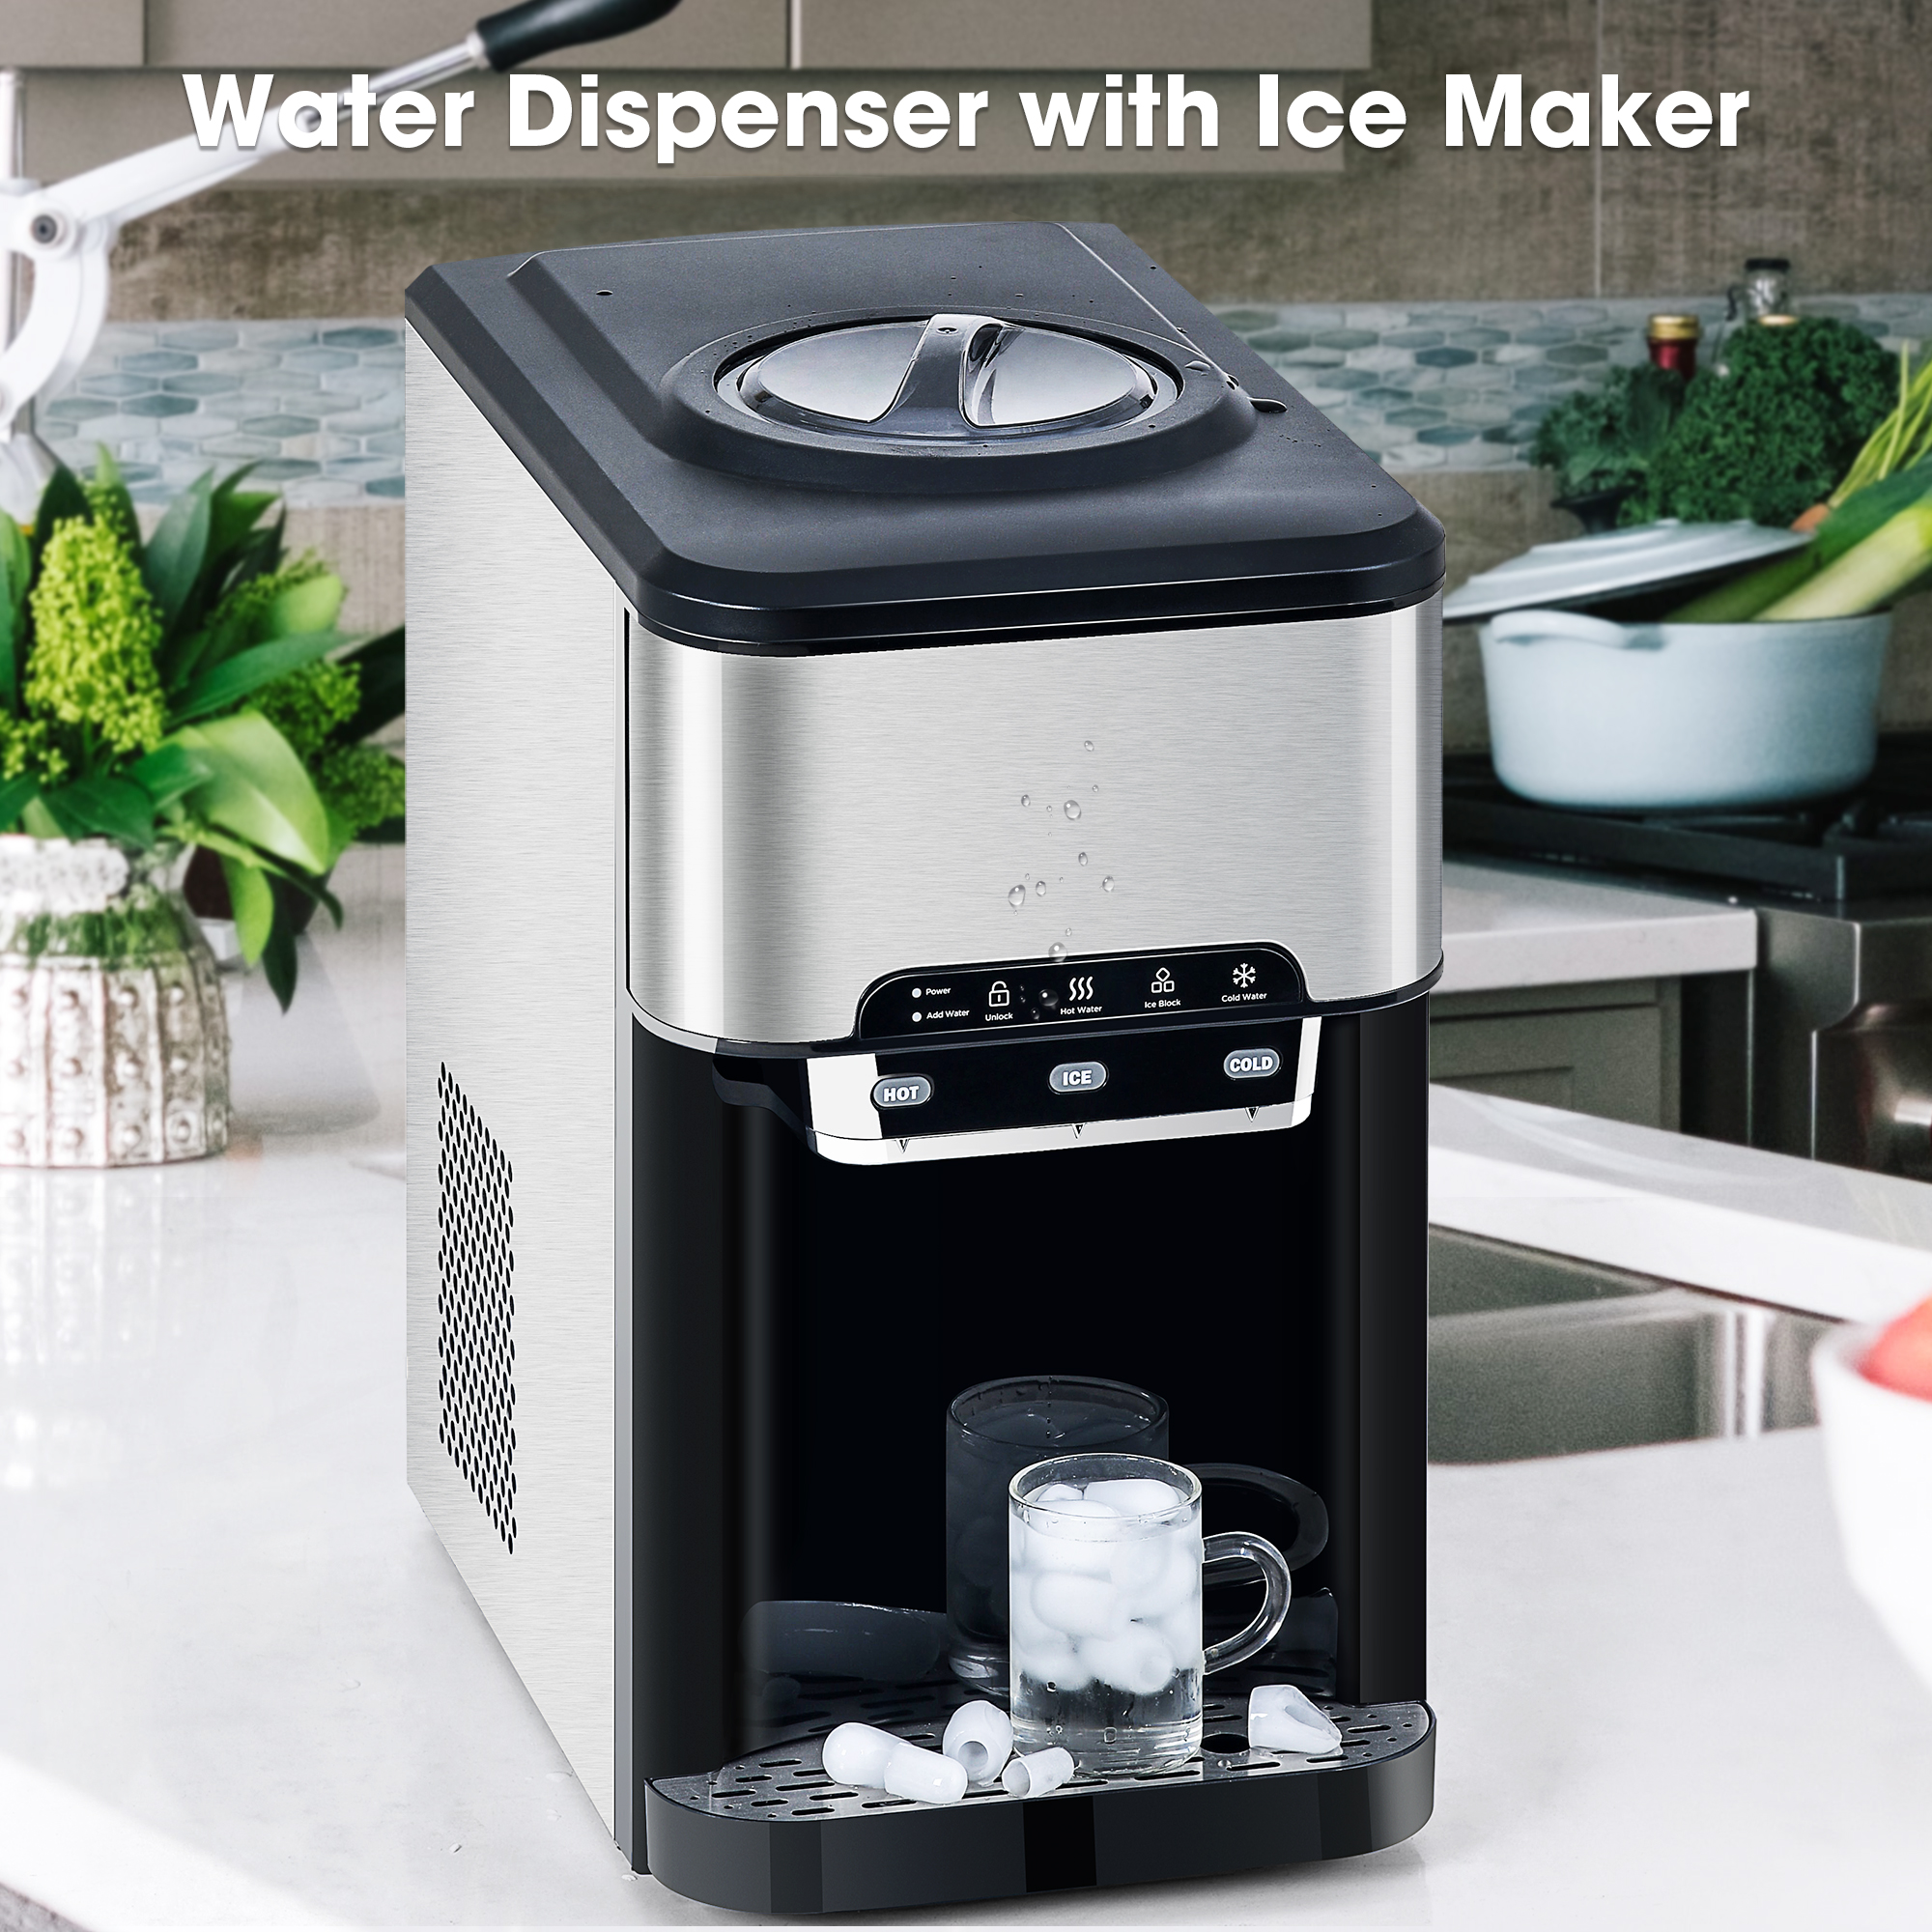 3 in 1 Water Dispenser with Ice Maker Machine Countertop, Portable Water Cooler, Quick 6 Mins Ice-making, Hot & Cold Water and Ice, Stainless Steel - image 2 of 10